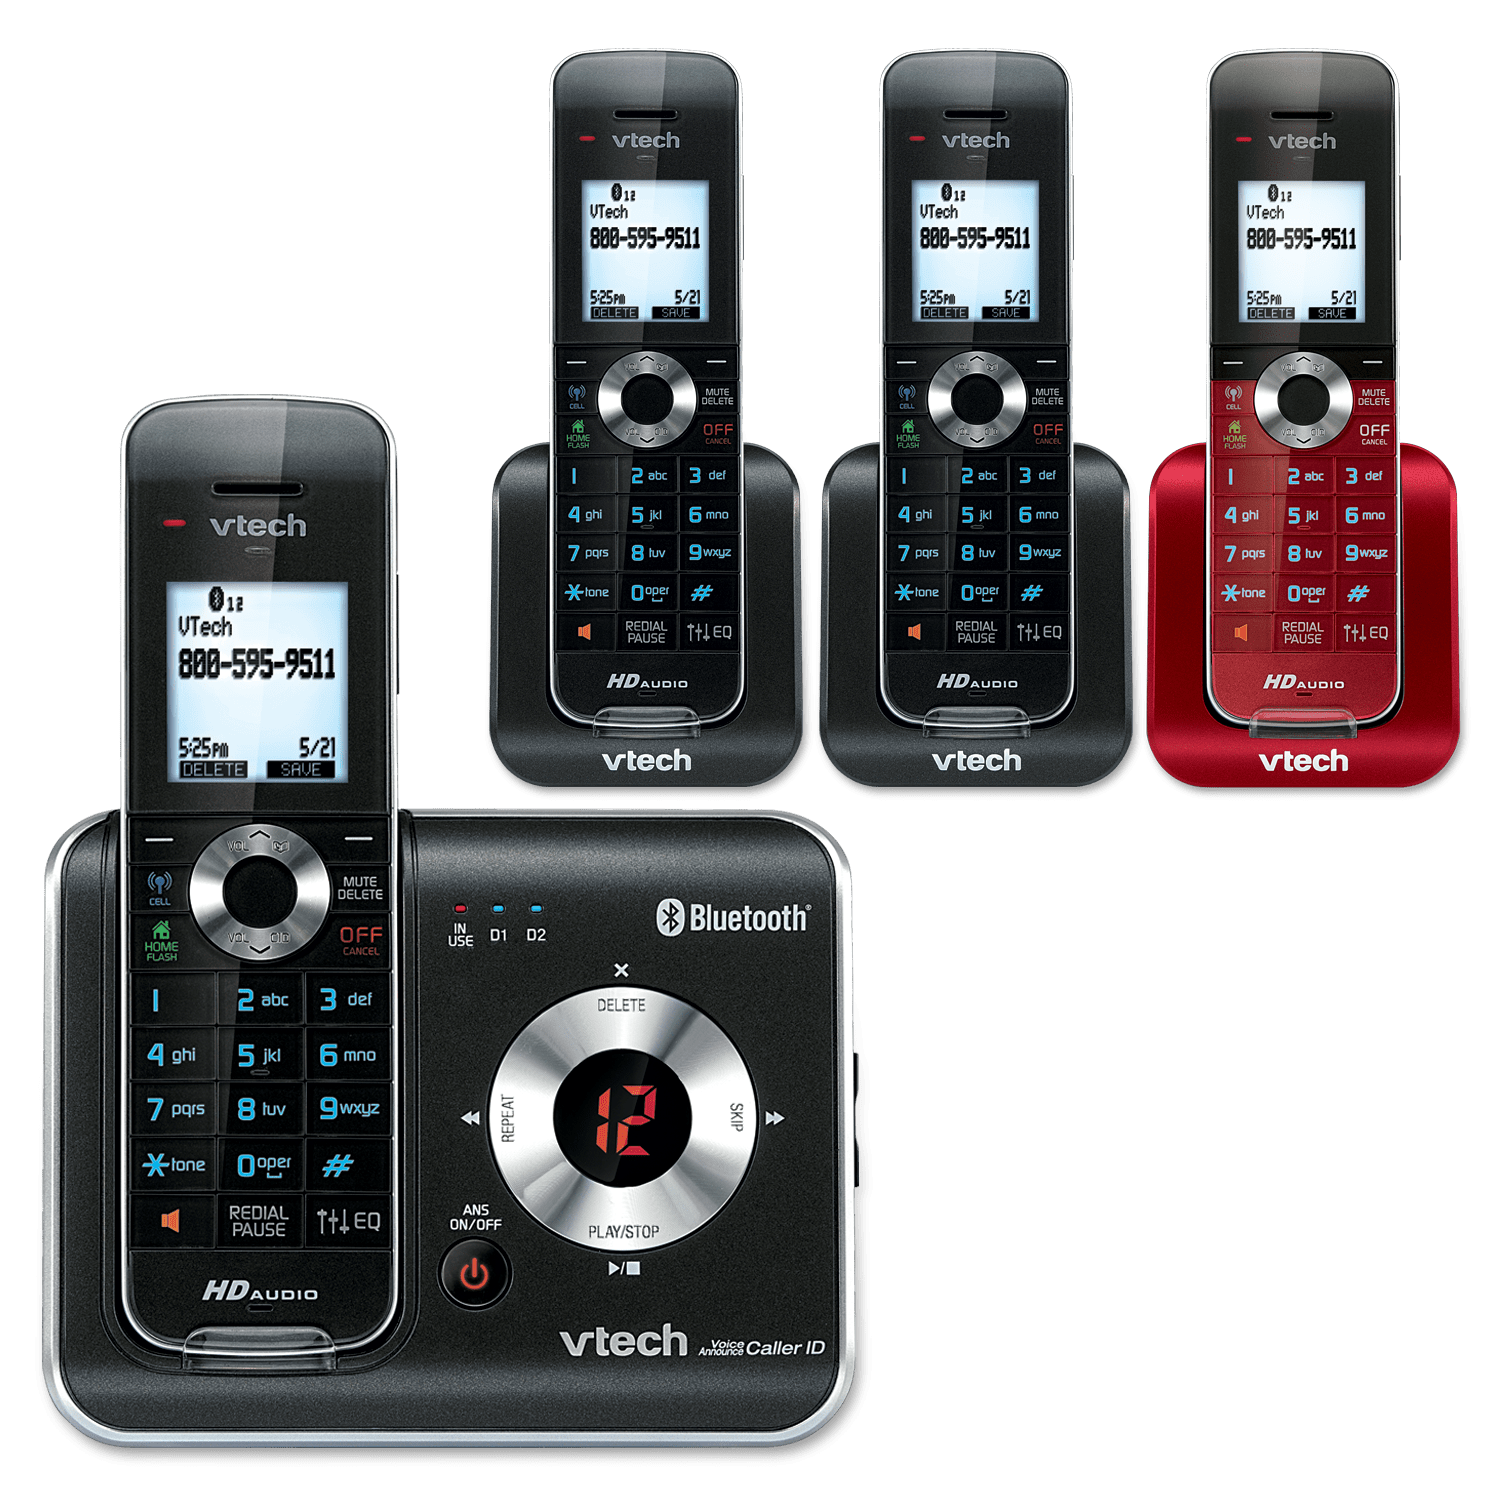 VTech Ls6425-3 3 Handset Cordless Answering System With Caller ID for sale online 